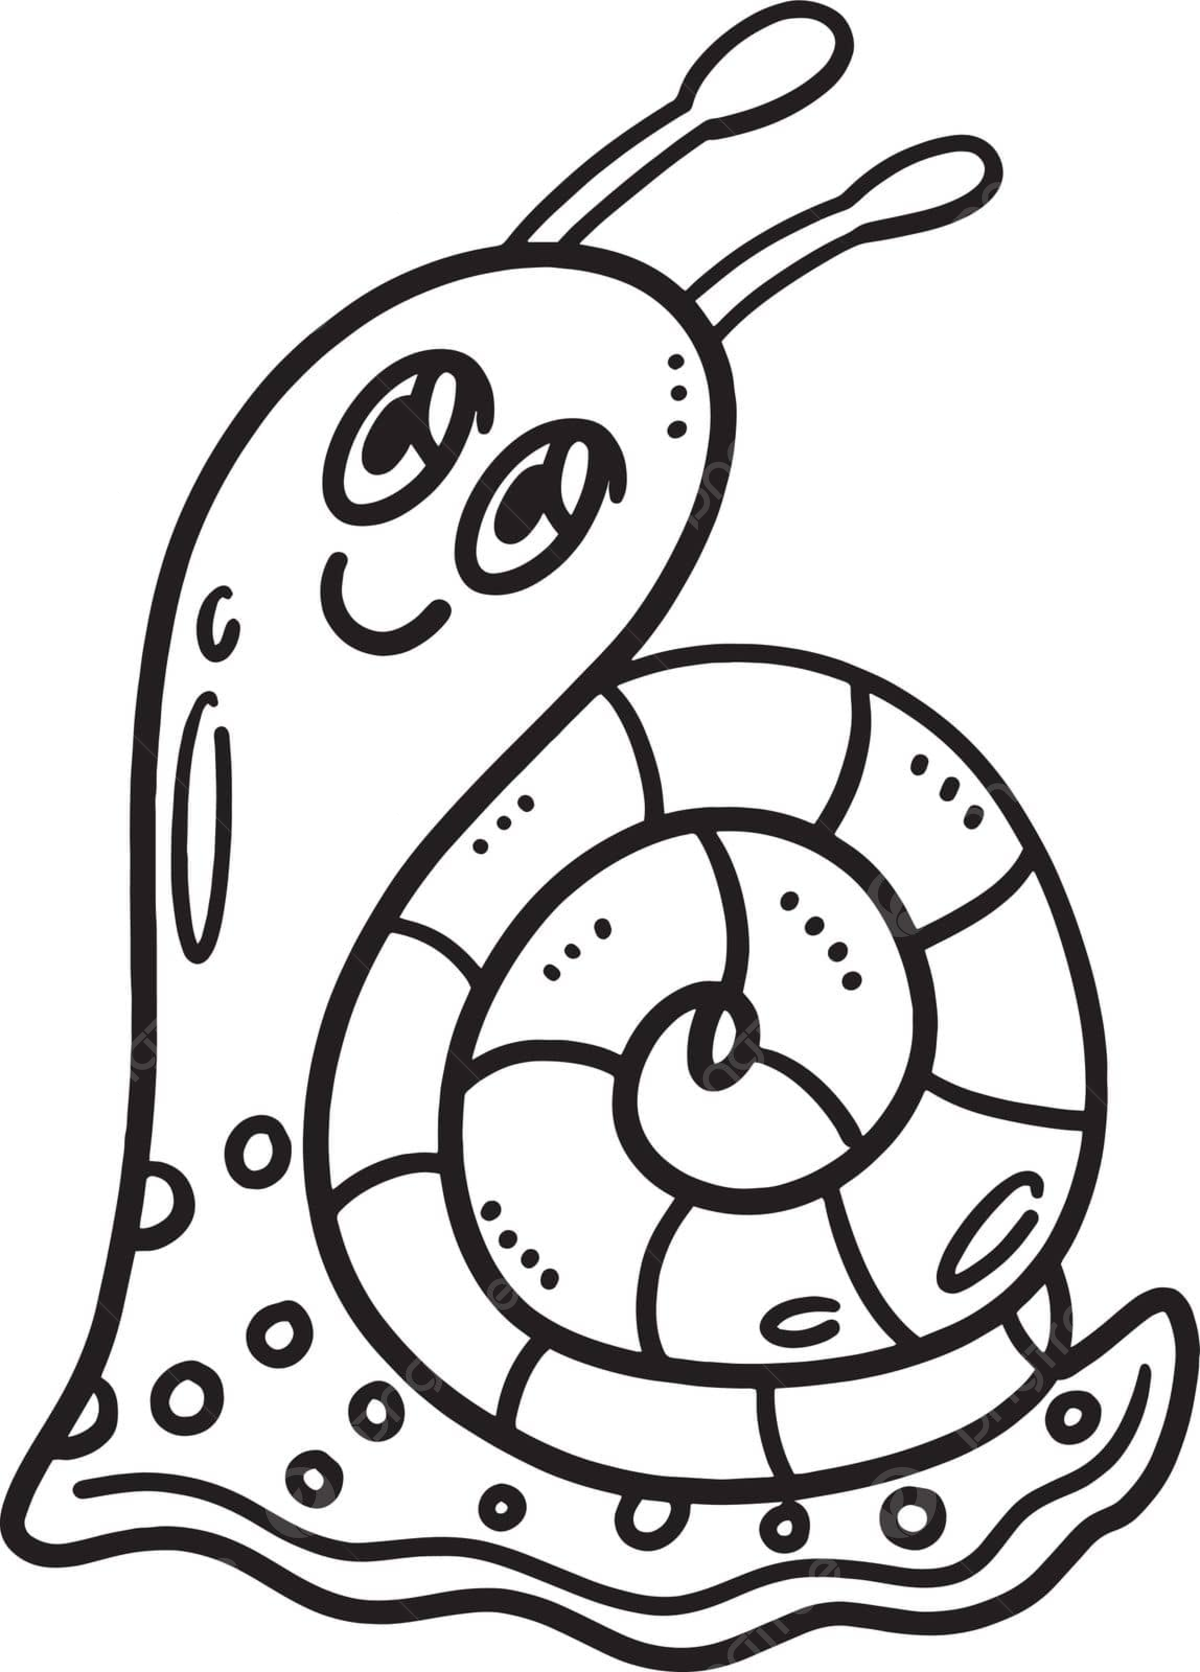 Baby snail isolated coloring page for kids illustration coloring page colouring book vector illustration coloring page colouring book png and vector with transparent background for free download